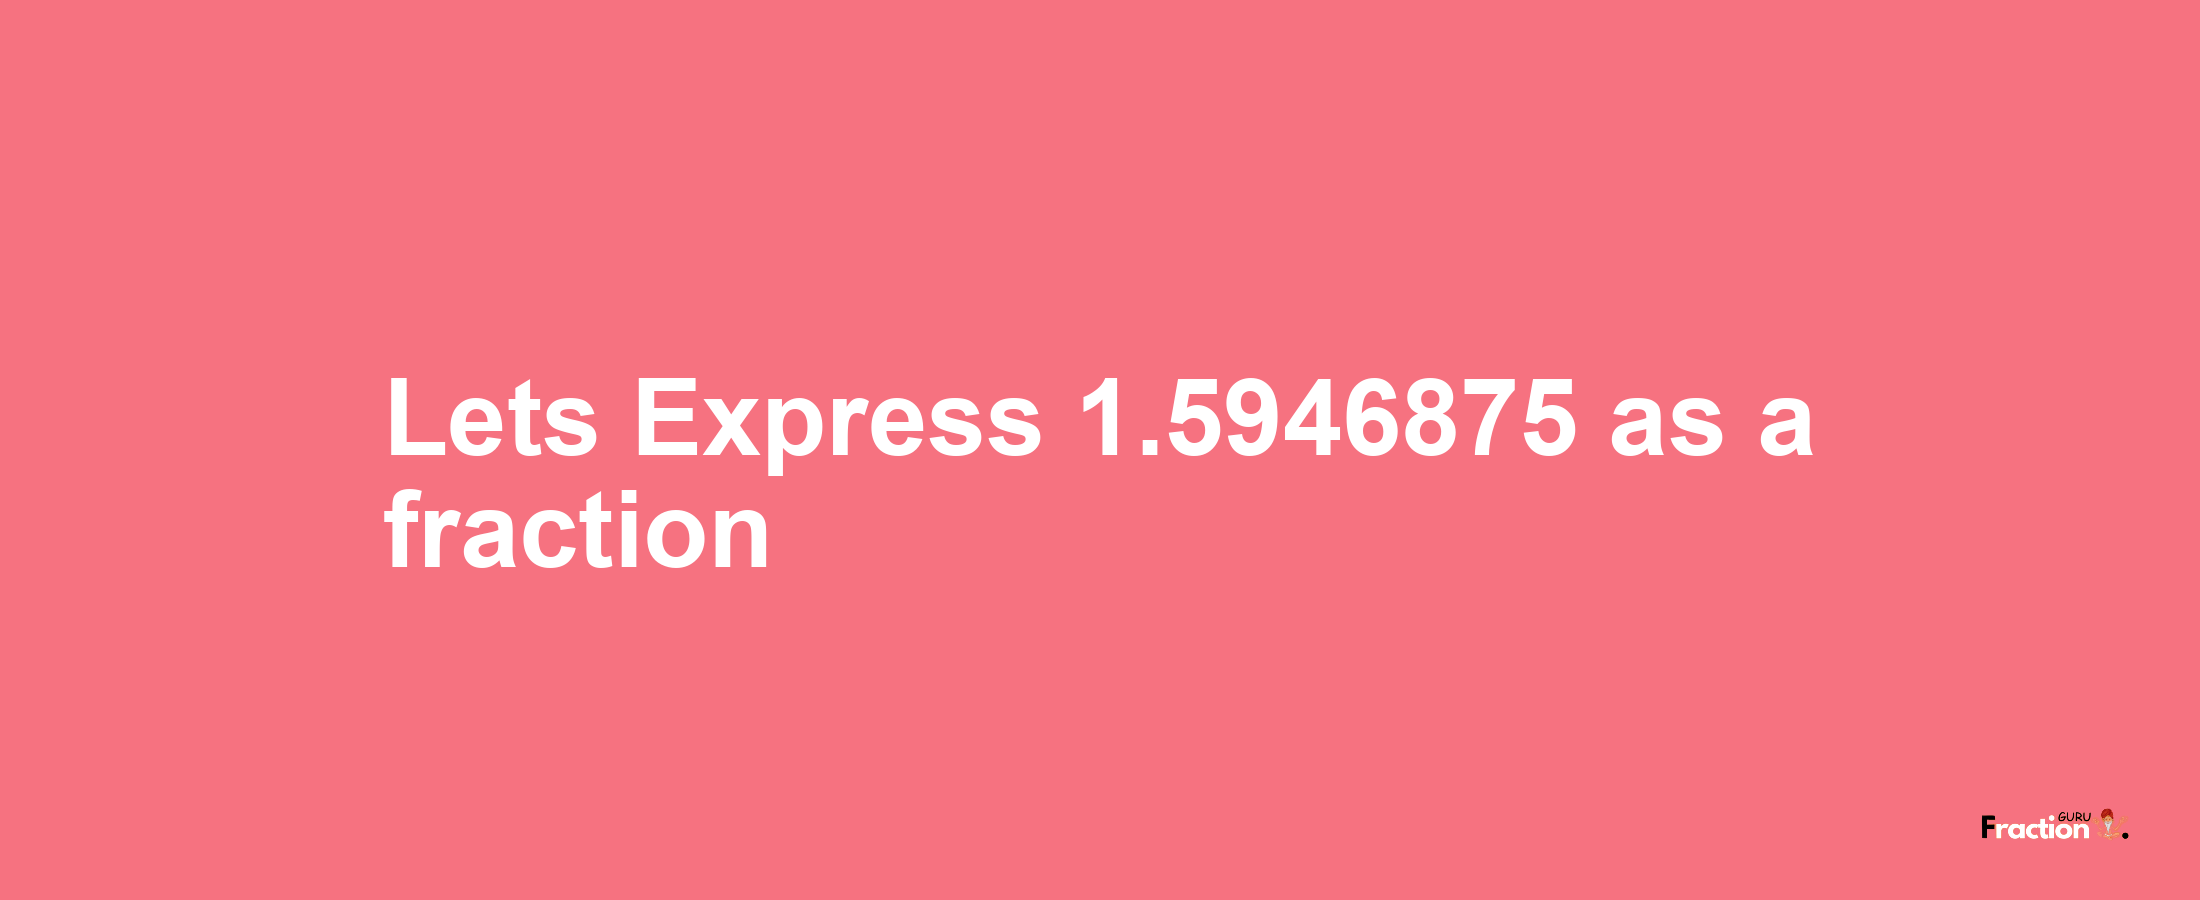 Lets Express 1.5946875 as afraction